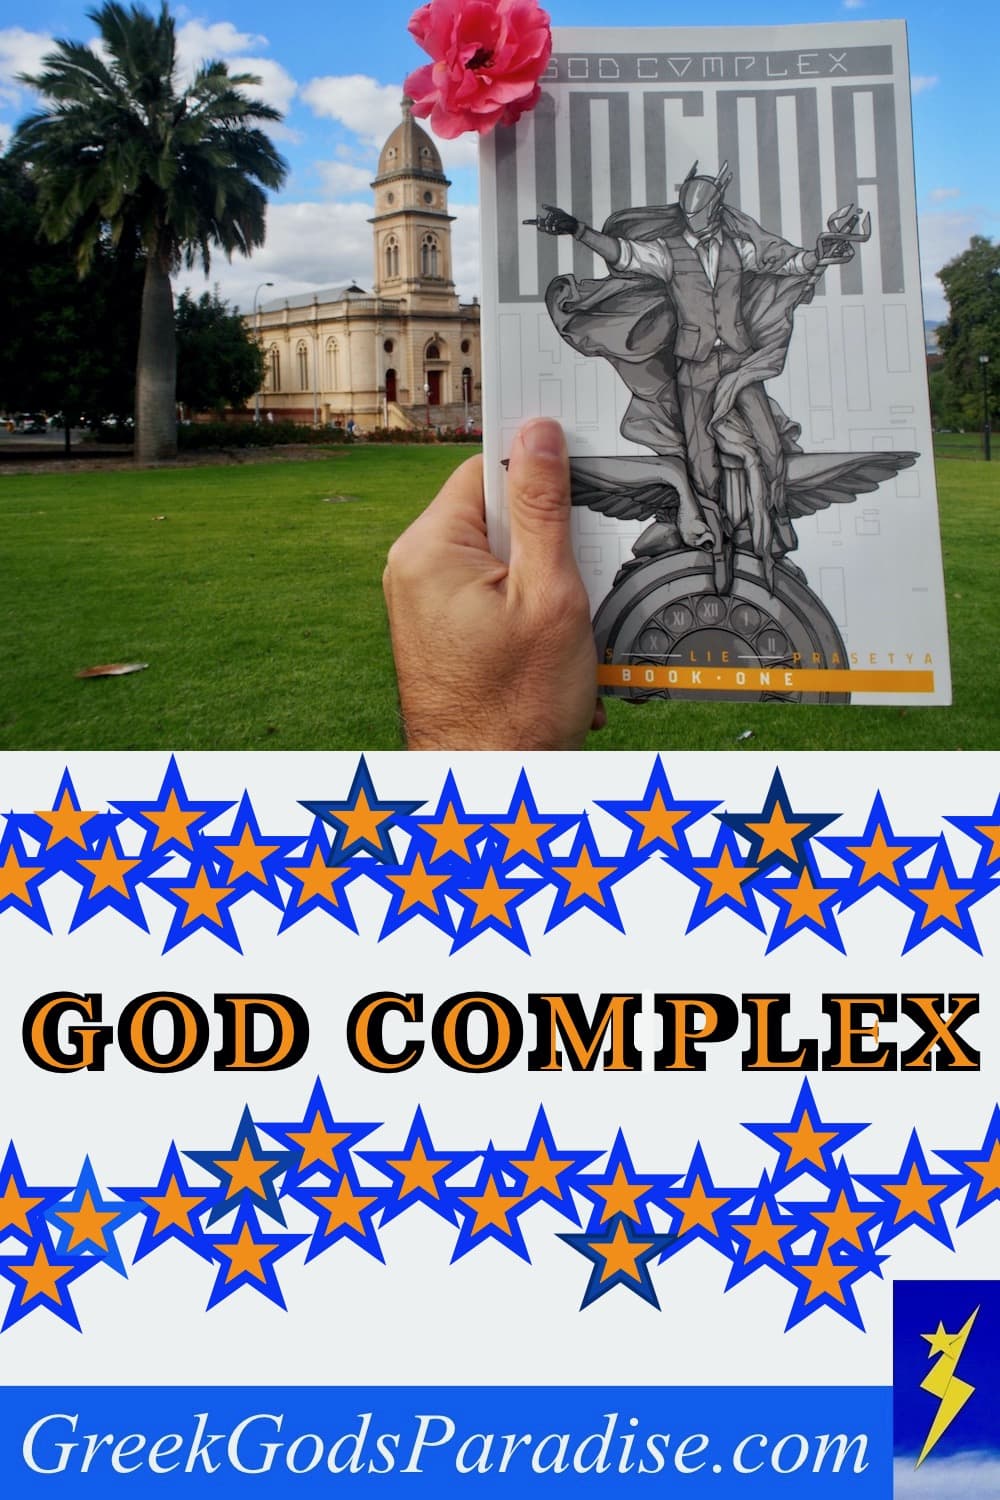 God Complex Dogma Review